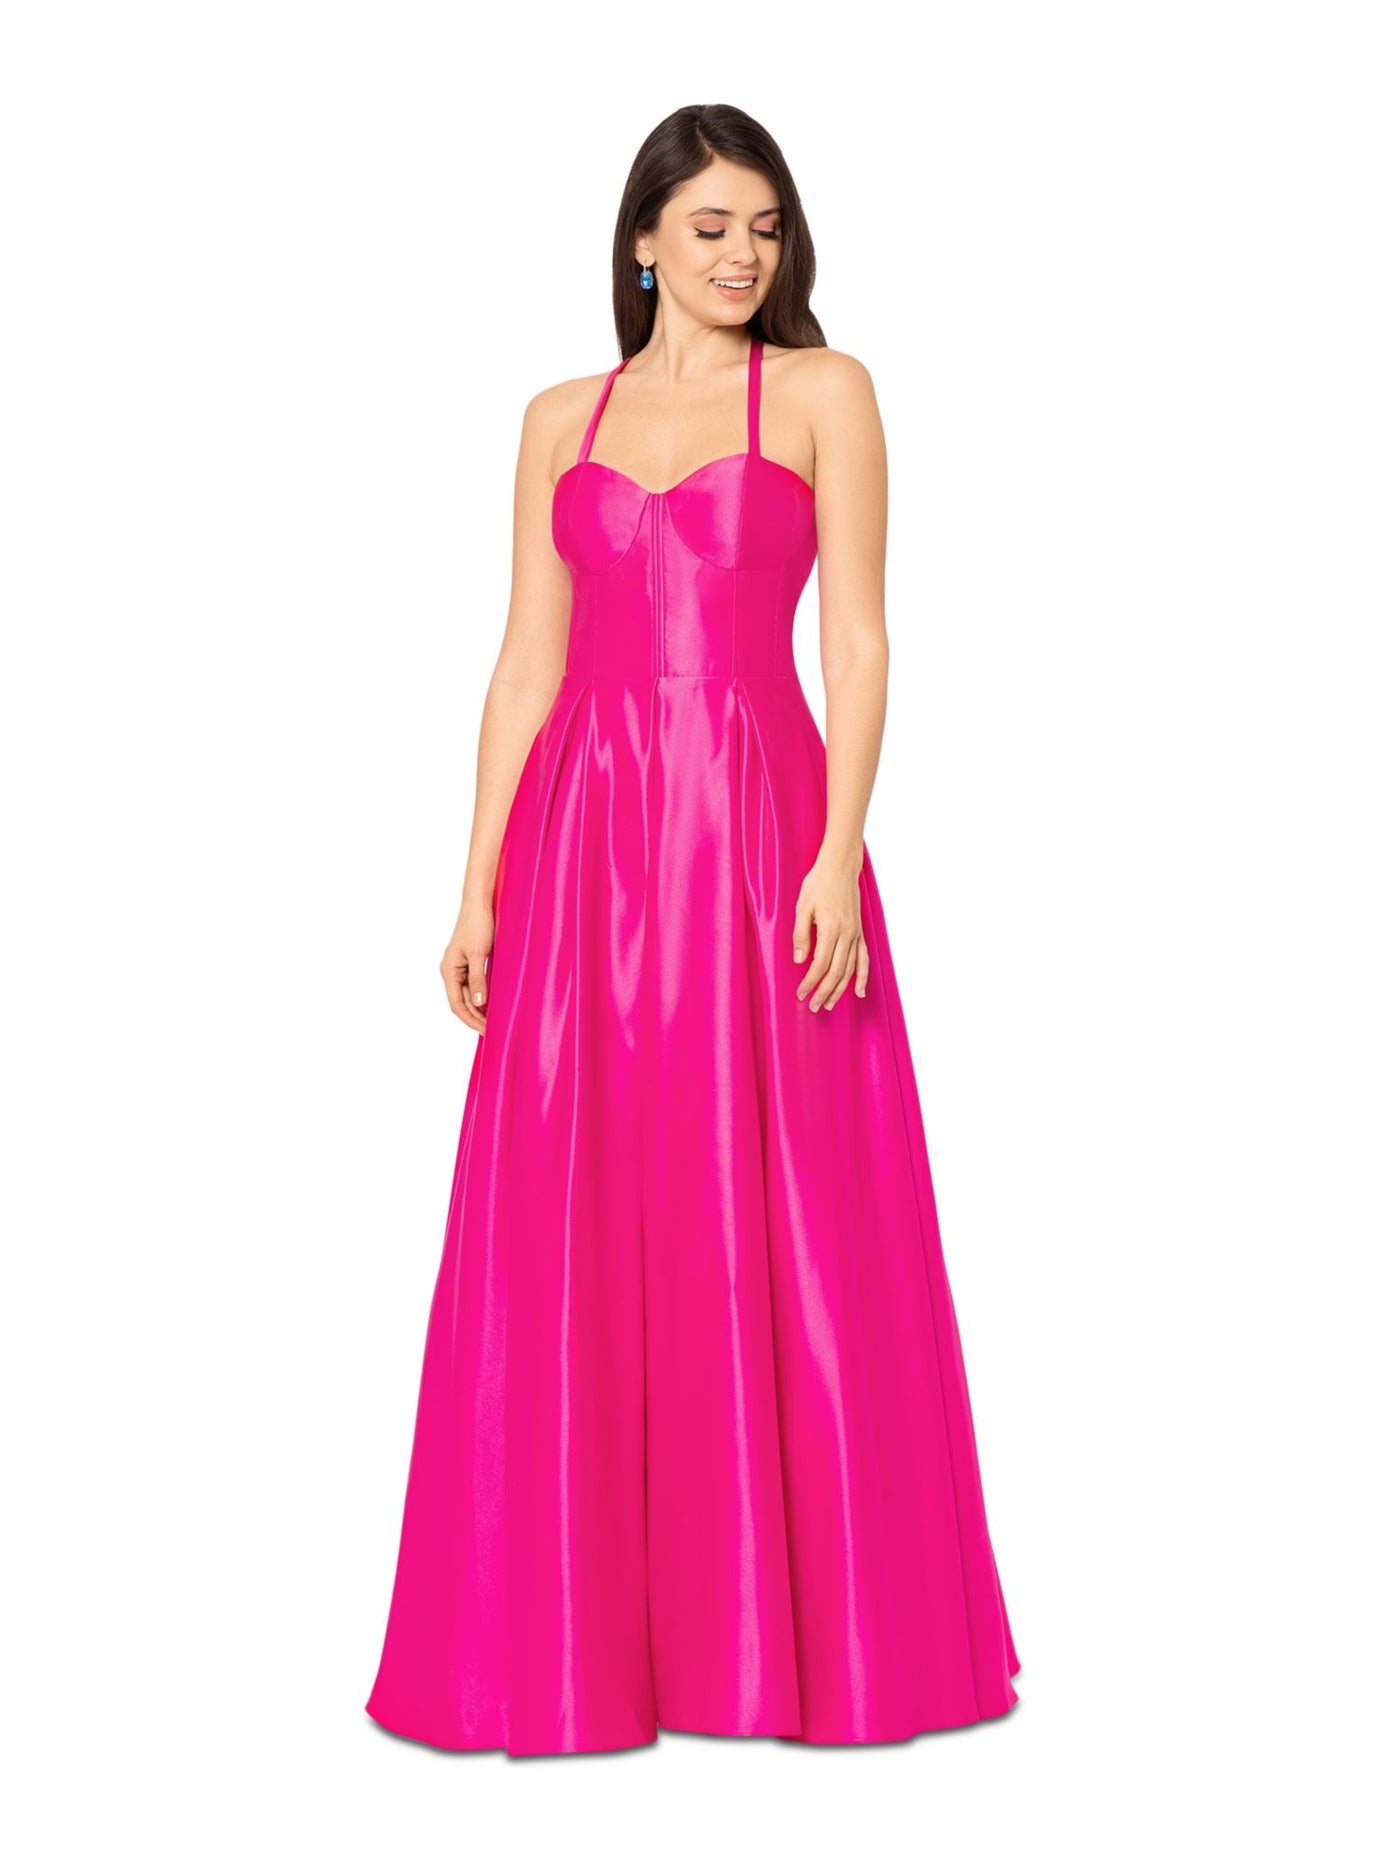 BLONDIE NITES Womens Pink Zippered Pocketed Lace-up Corset Bodice Lined Sleeveless Sweetheart Neckline Full-Length Formal Gown Dress Juniors 11